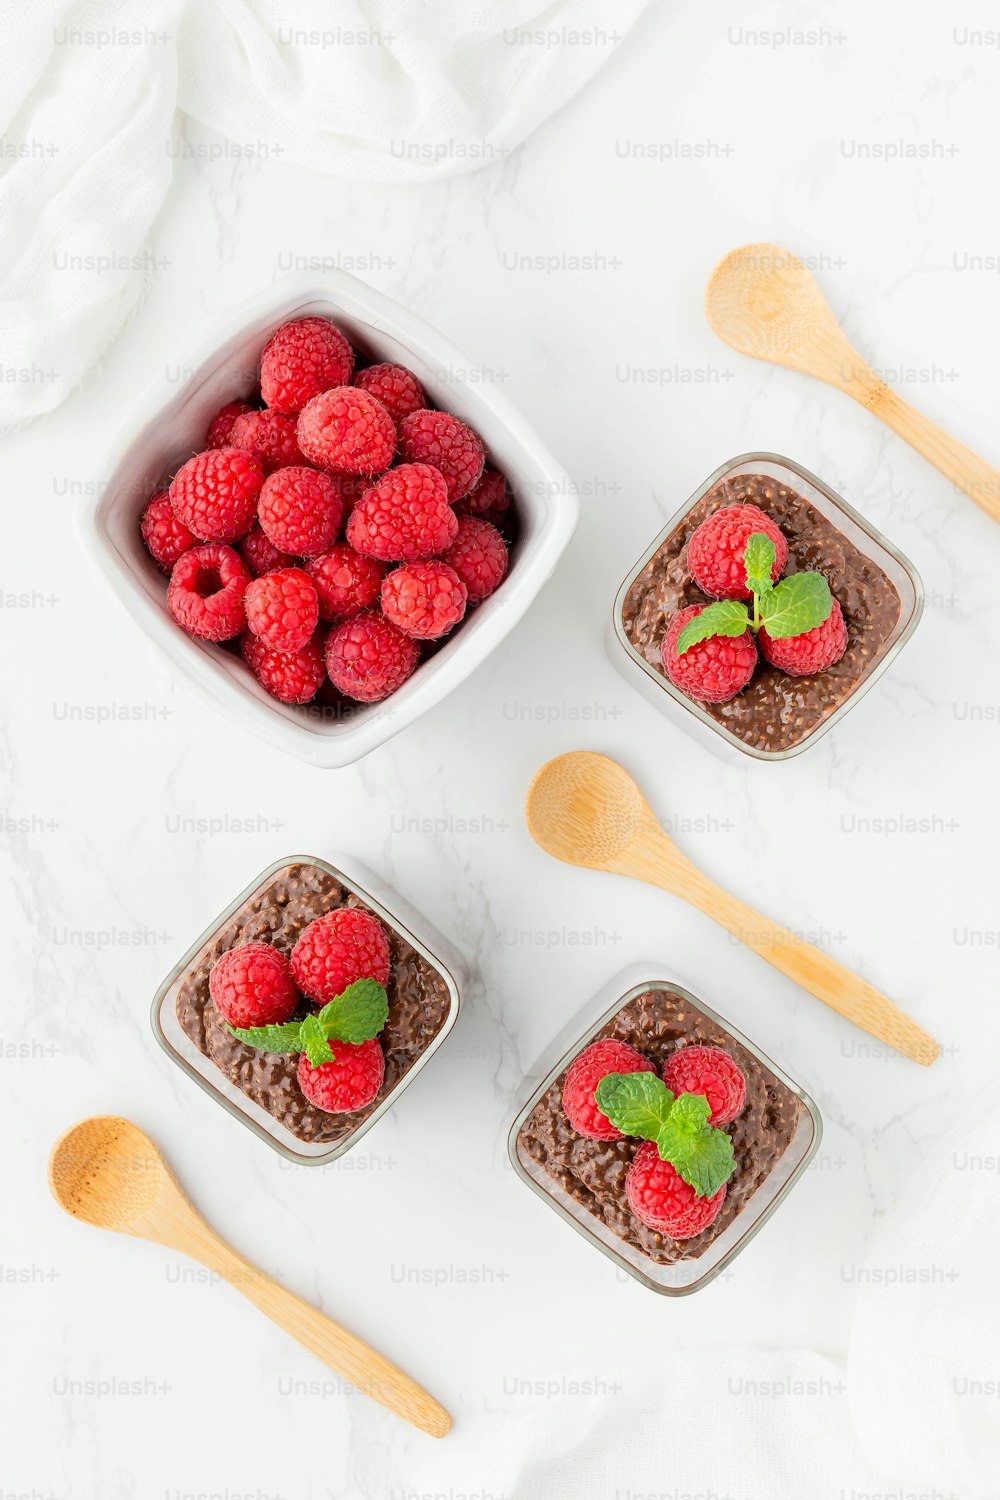 a bowl of chocolate pudding with raspberries on top